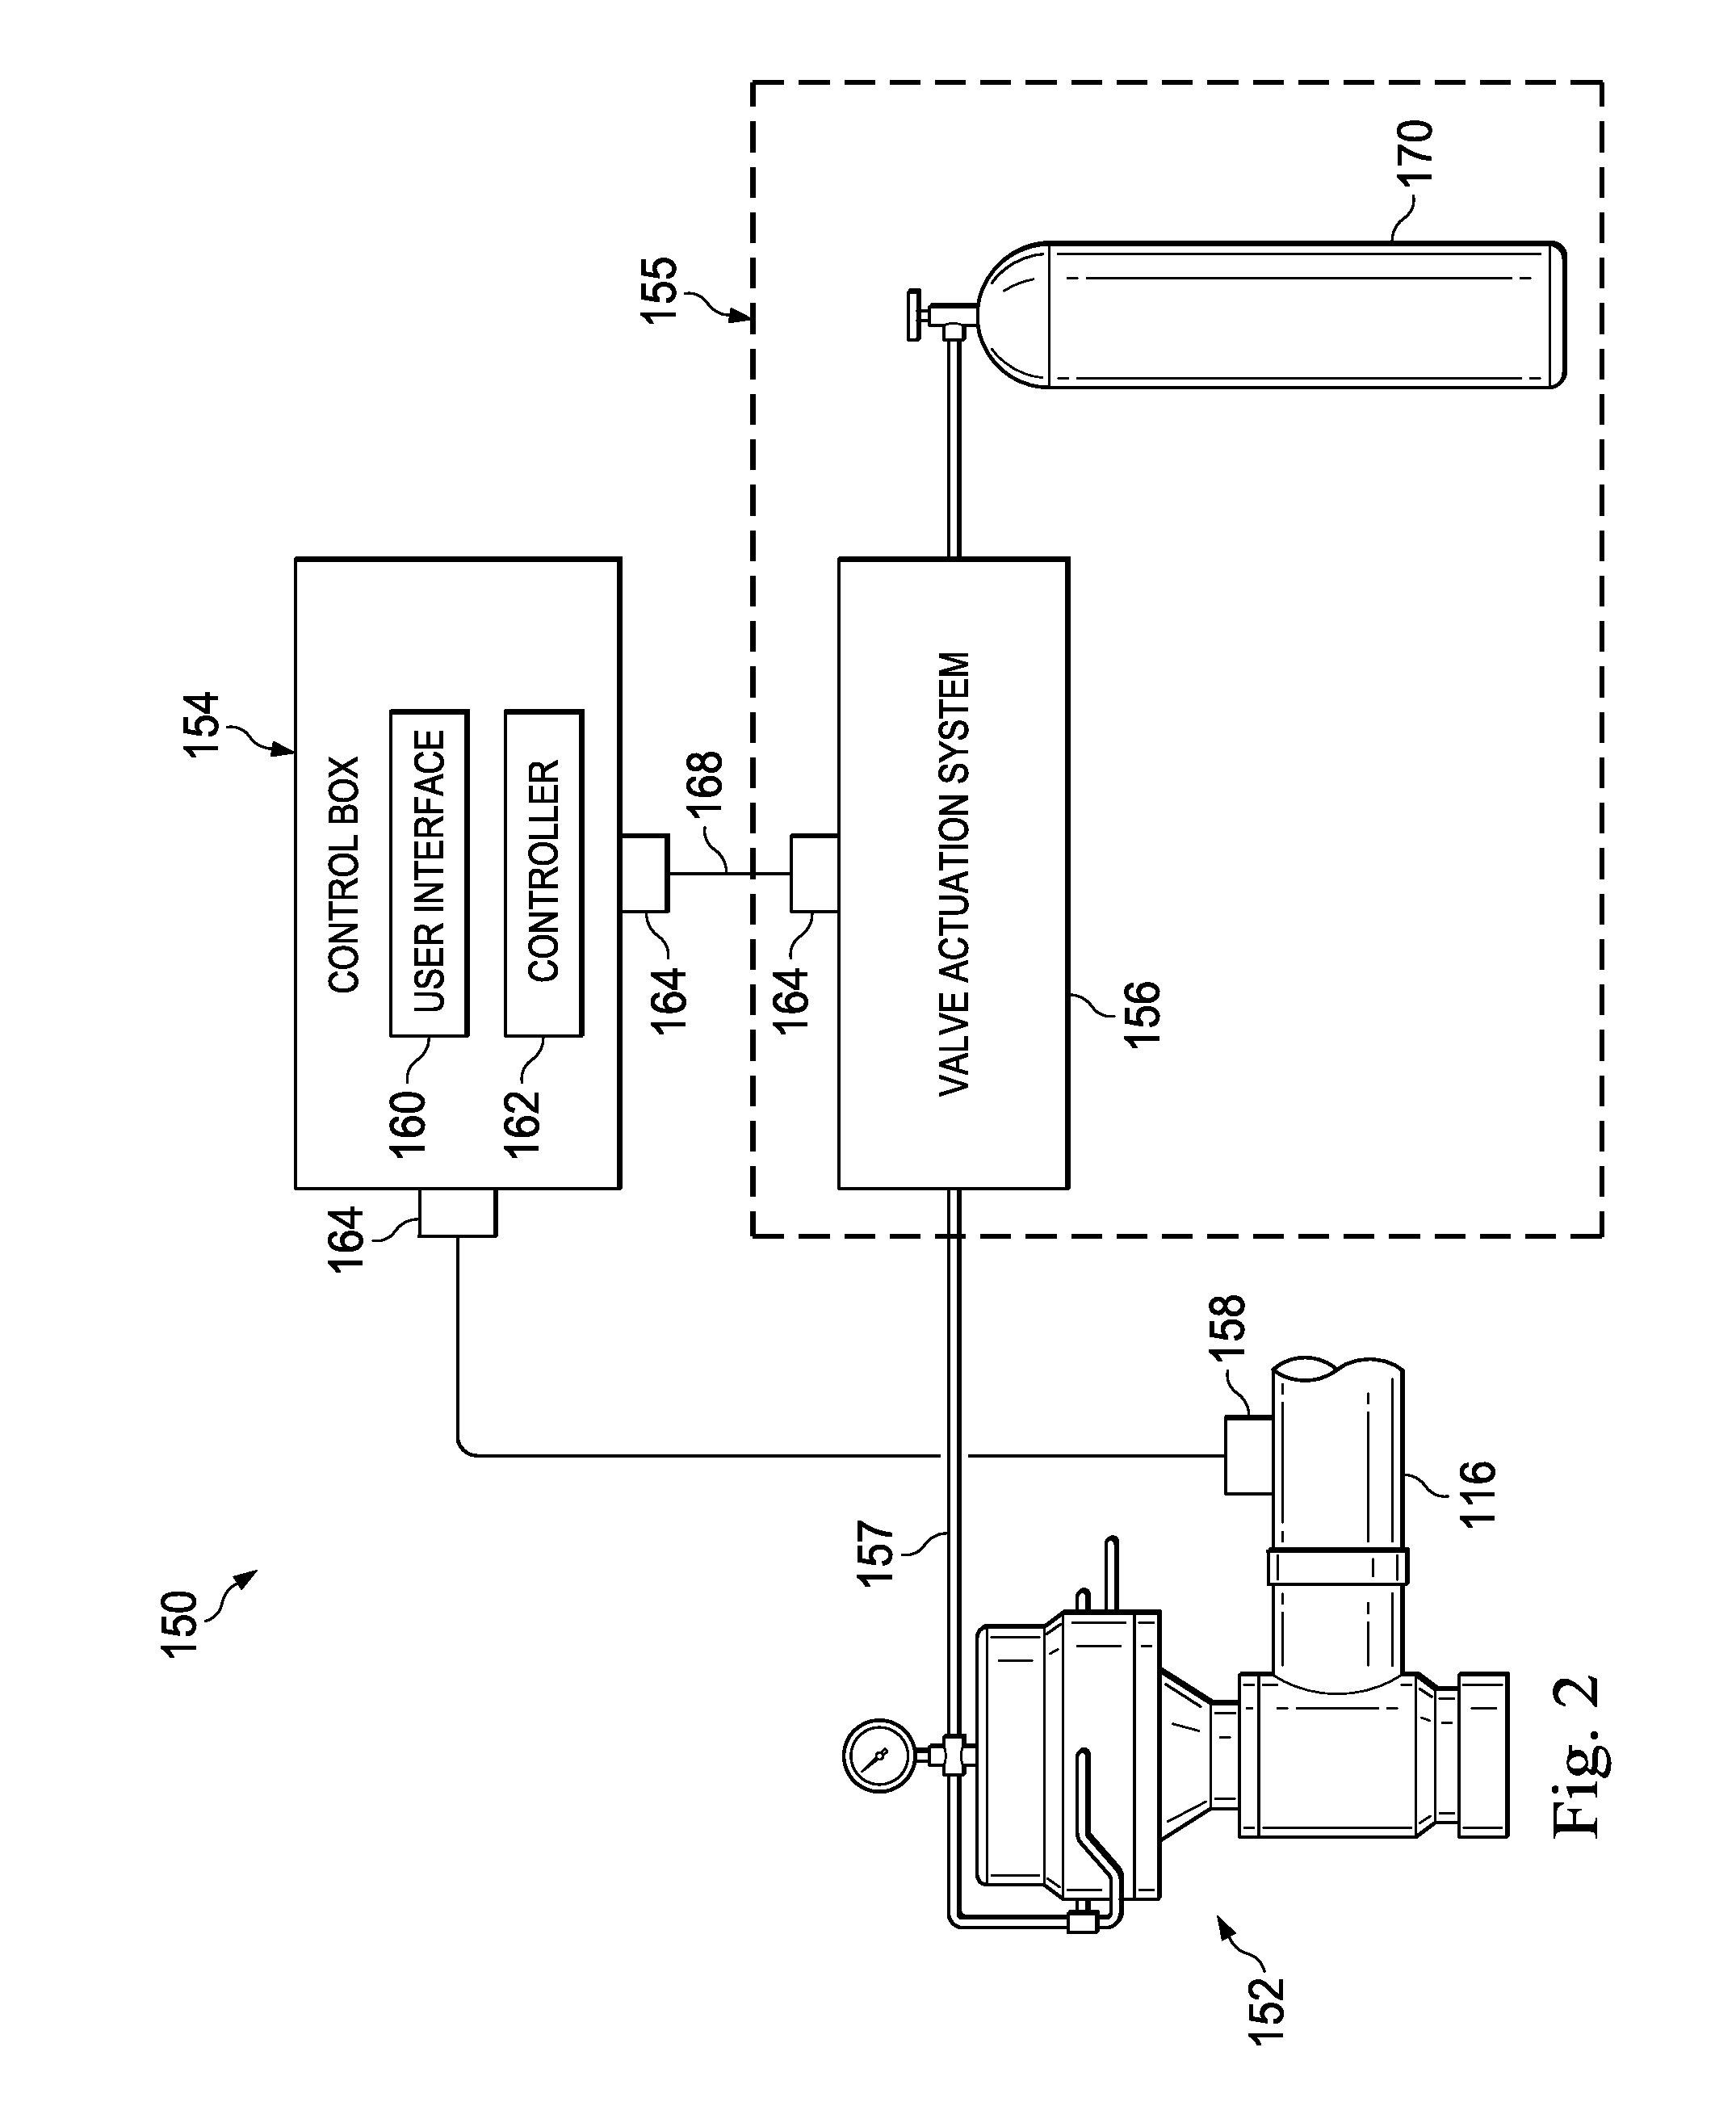 Automated relief valve control system and method